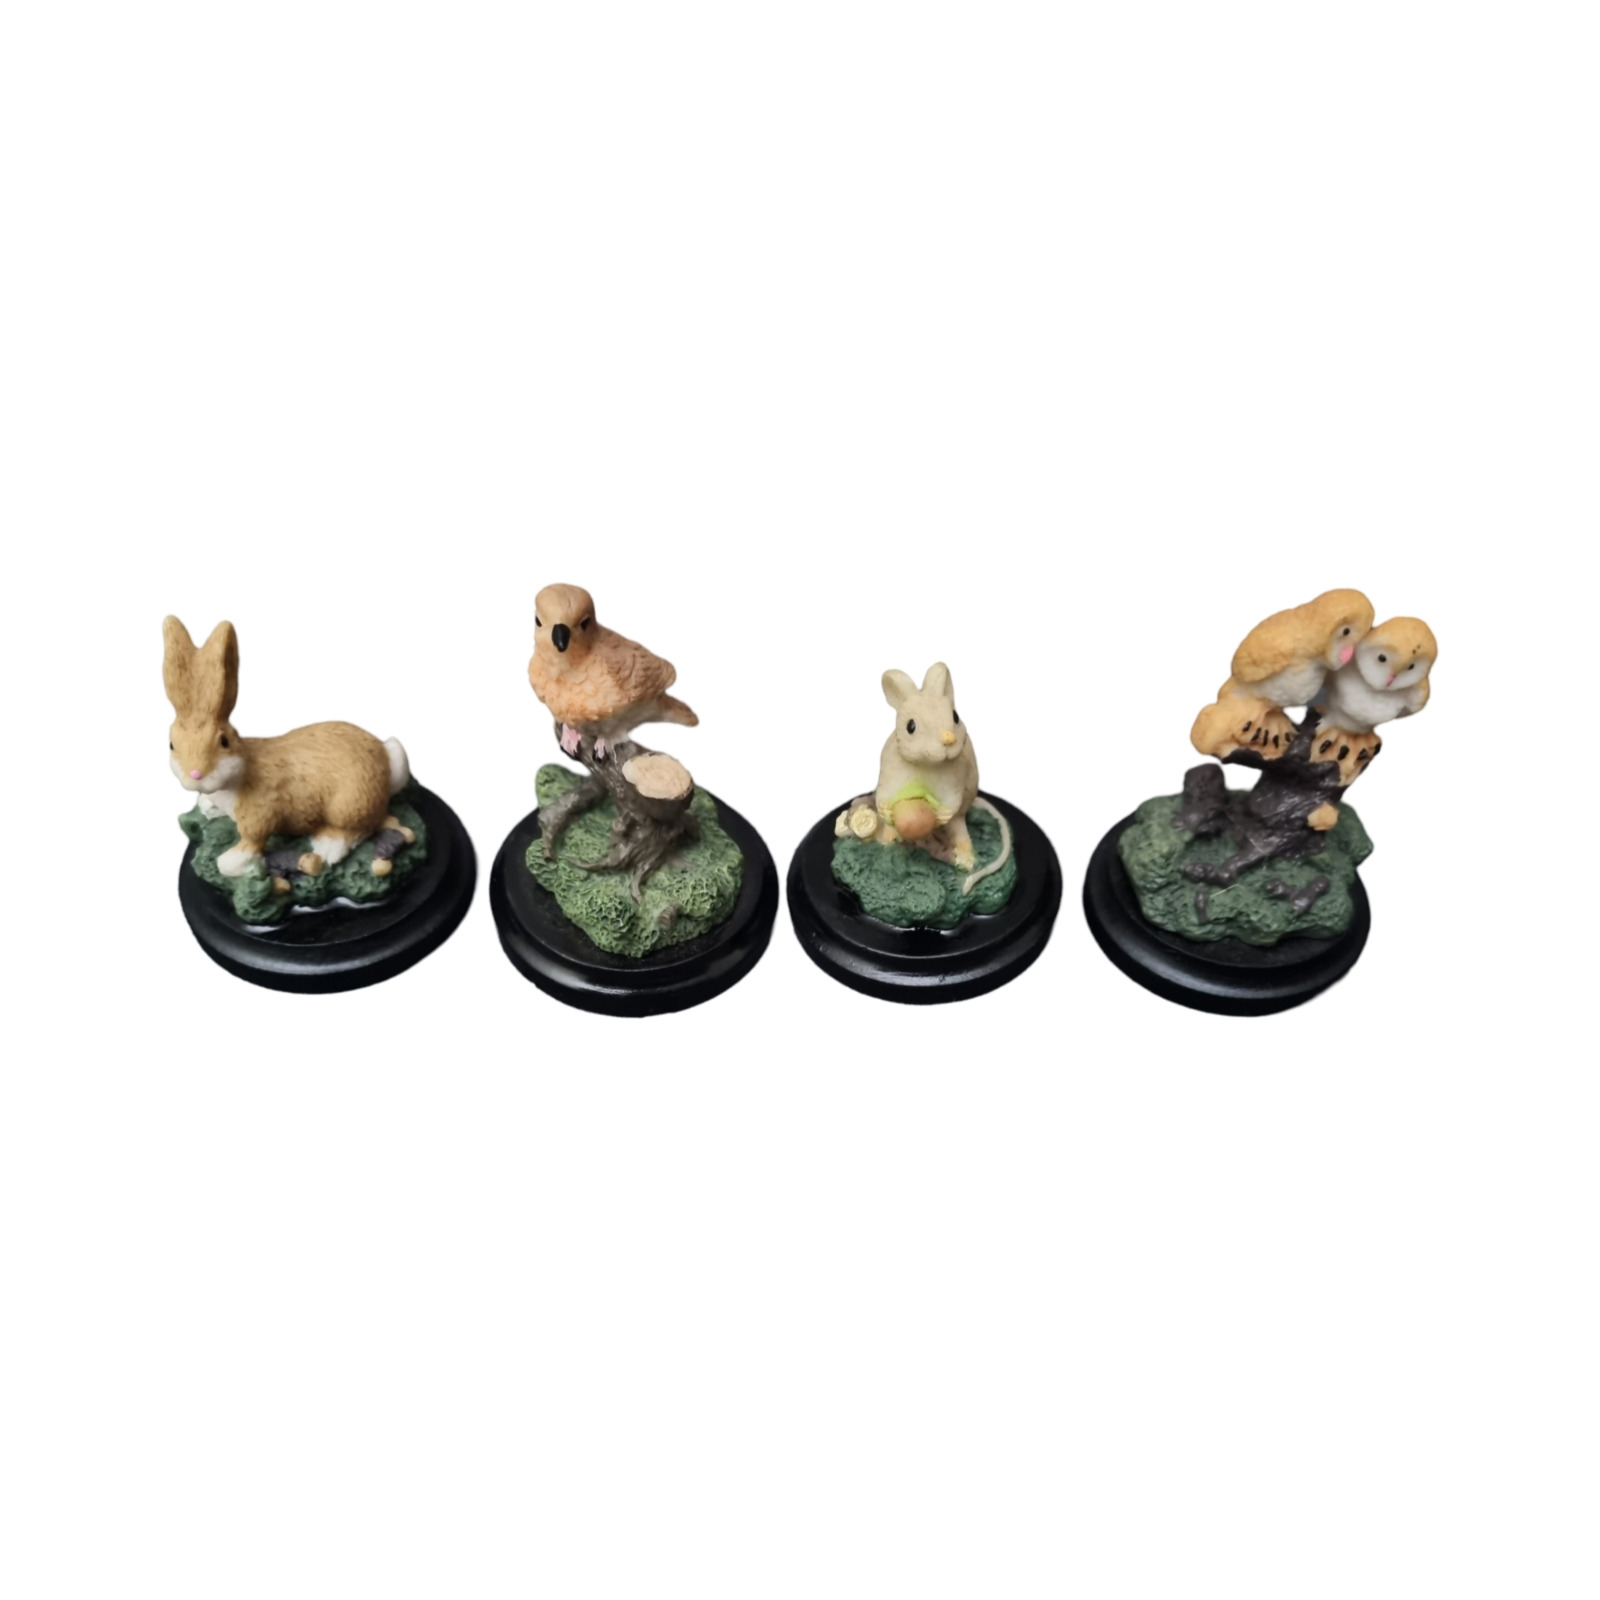 Set of 4 Small Ceramic Nature Animal Figurines with a Black Timber Base